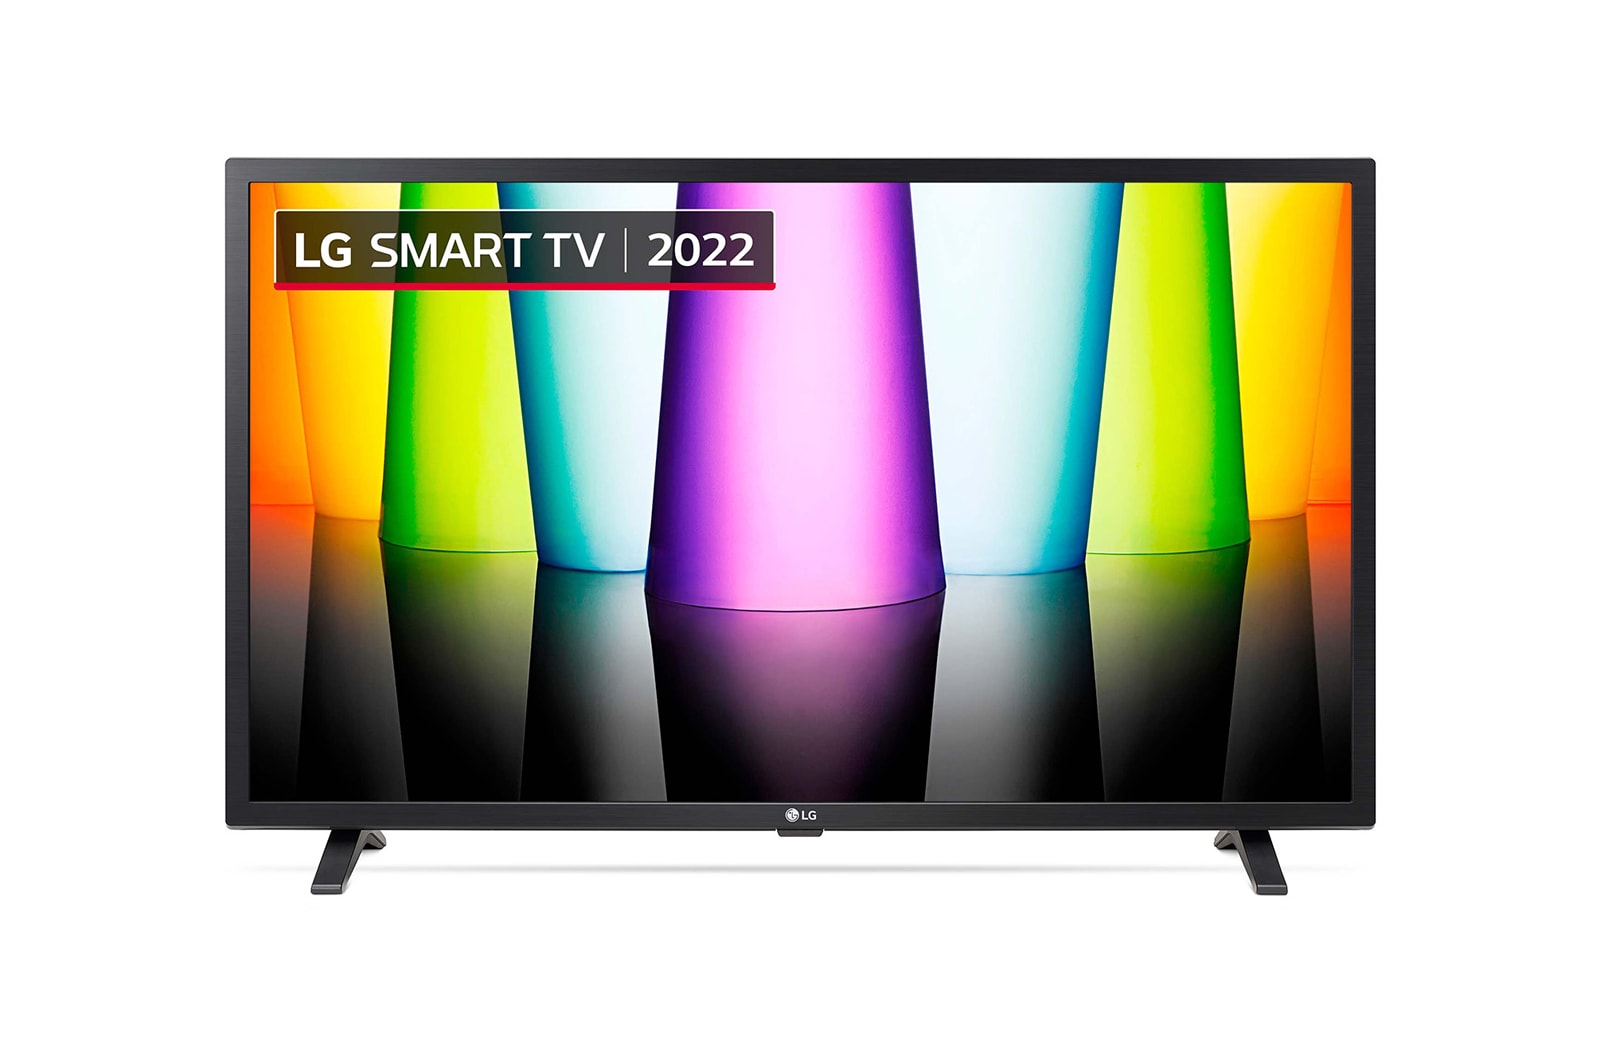 42 Inch Smart TV, 1080P LED Full HD TV with Wi-Fi Connectivity and Mobile  App